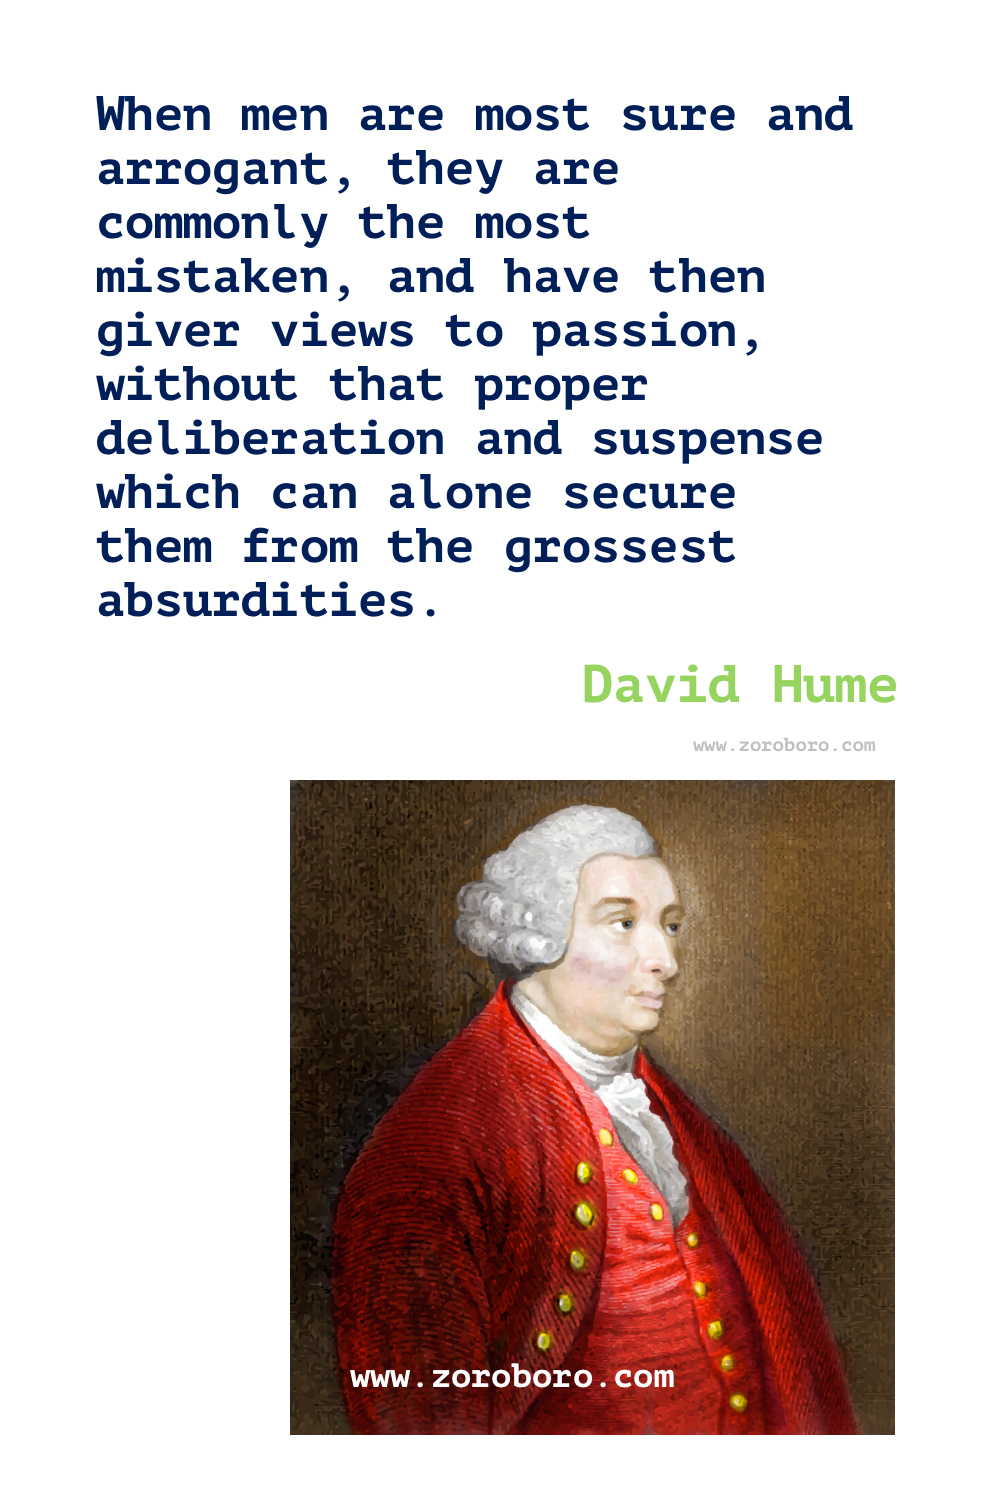 David Hume Quotes. David Hume Philosophy. David Hume Books Quotes. Essays, Moral, Political, Life and Literary. David Hume Quotes    David Hume's Books - A Treatise of Human Nature, An Enquiry Concerning Human Understanding, Dialogues Concerning Natural Religion, An Enquiry Concerning the Principles of Morals & The History of England (Hume) .